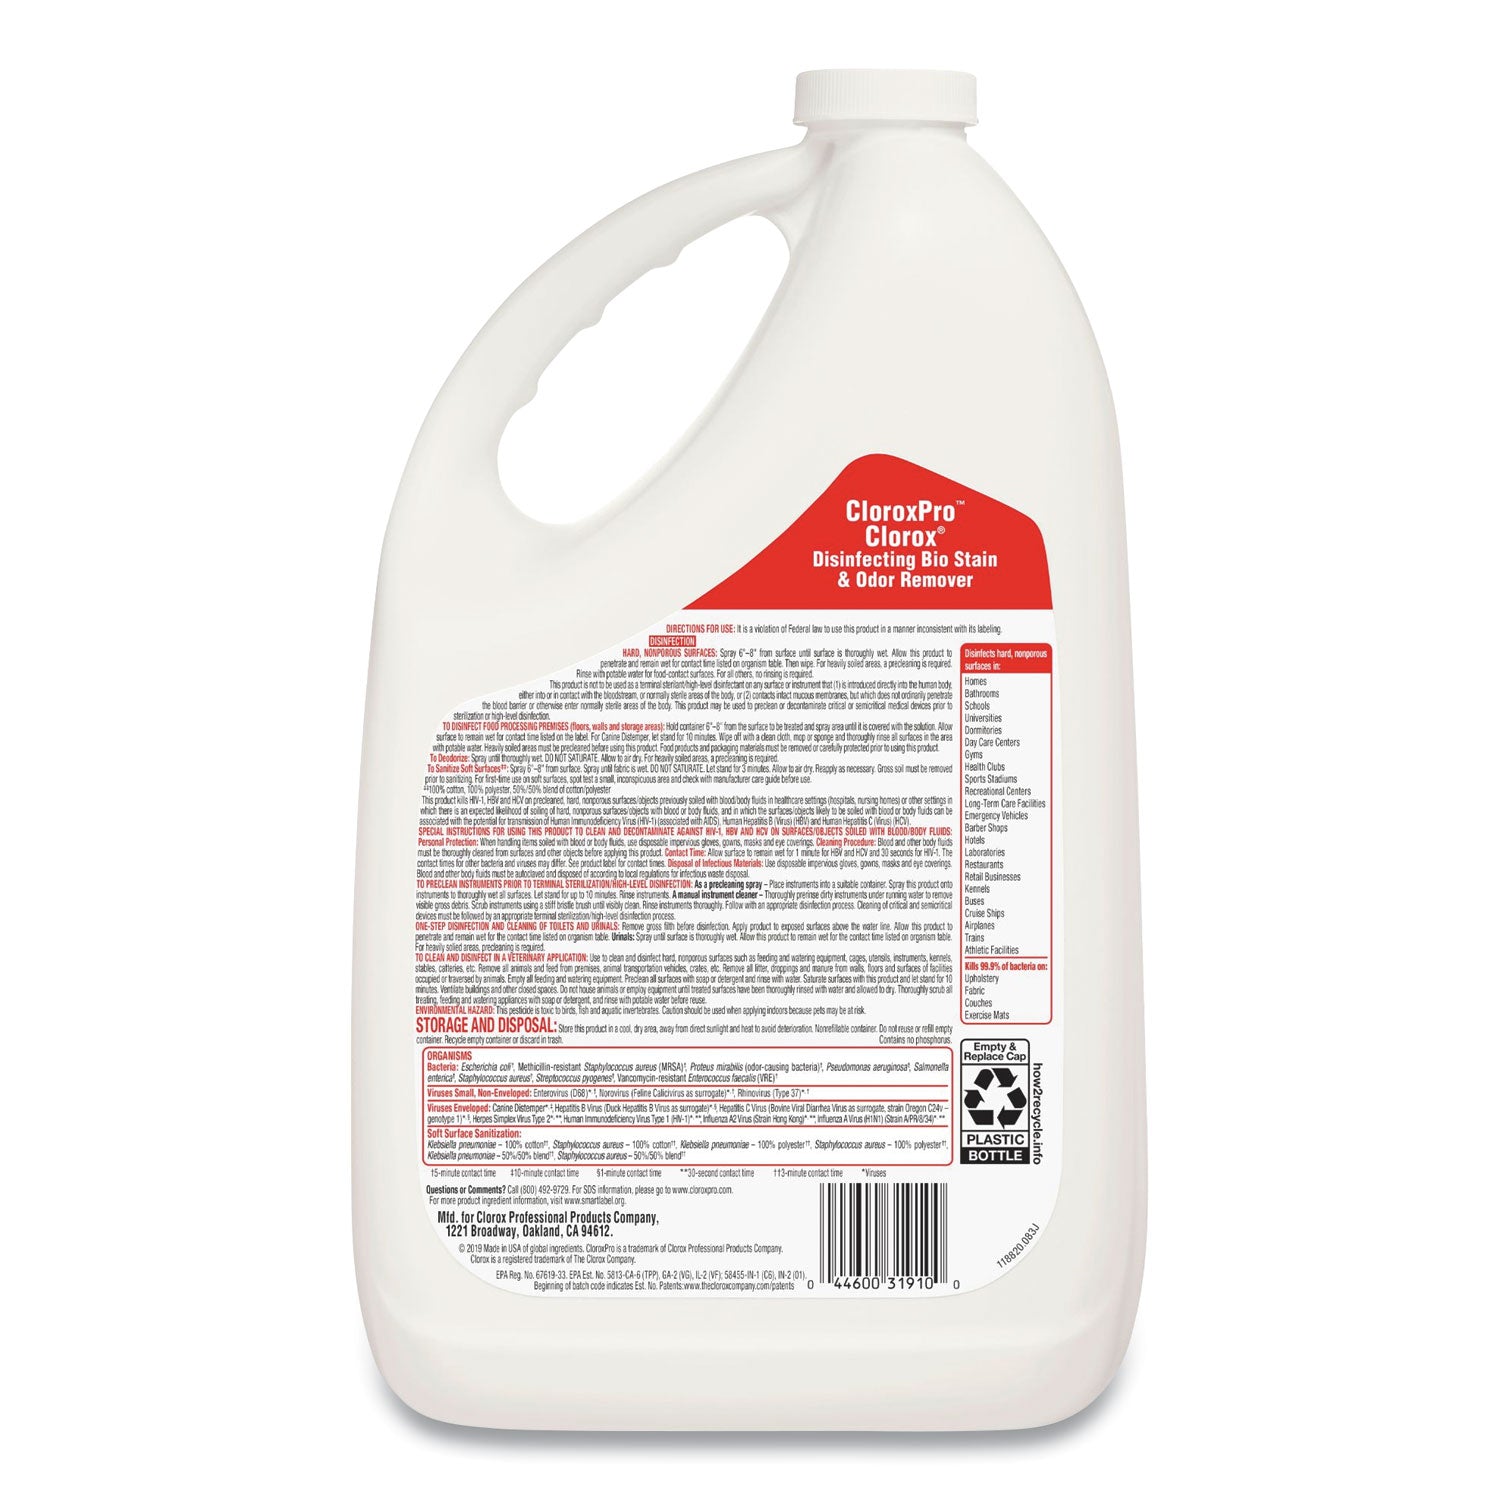 disinfecting-bio-stain-and-odor-remover-fragranced-128-oz-refill-bottle-4-ct_clo31910 - 6